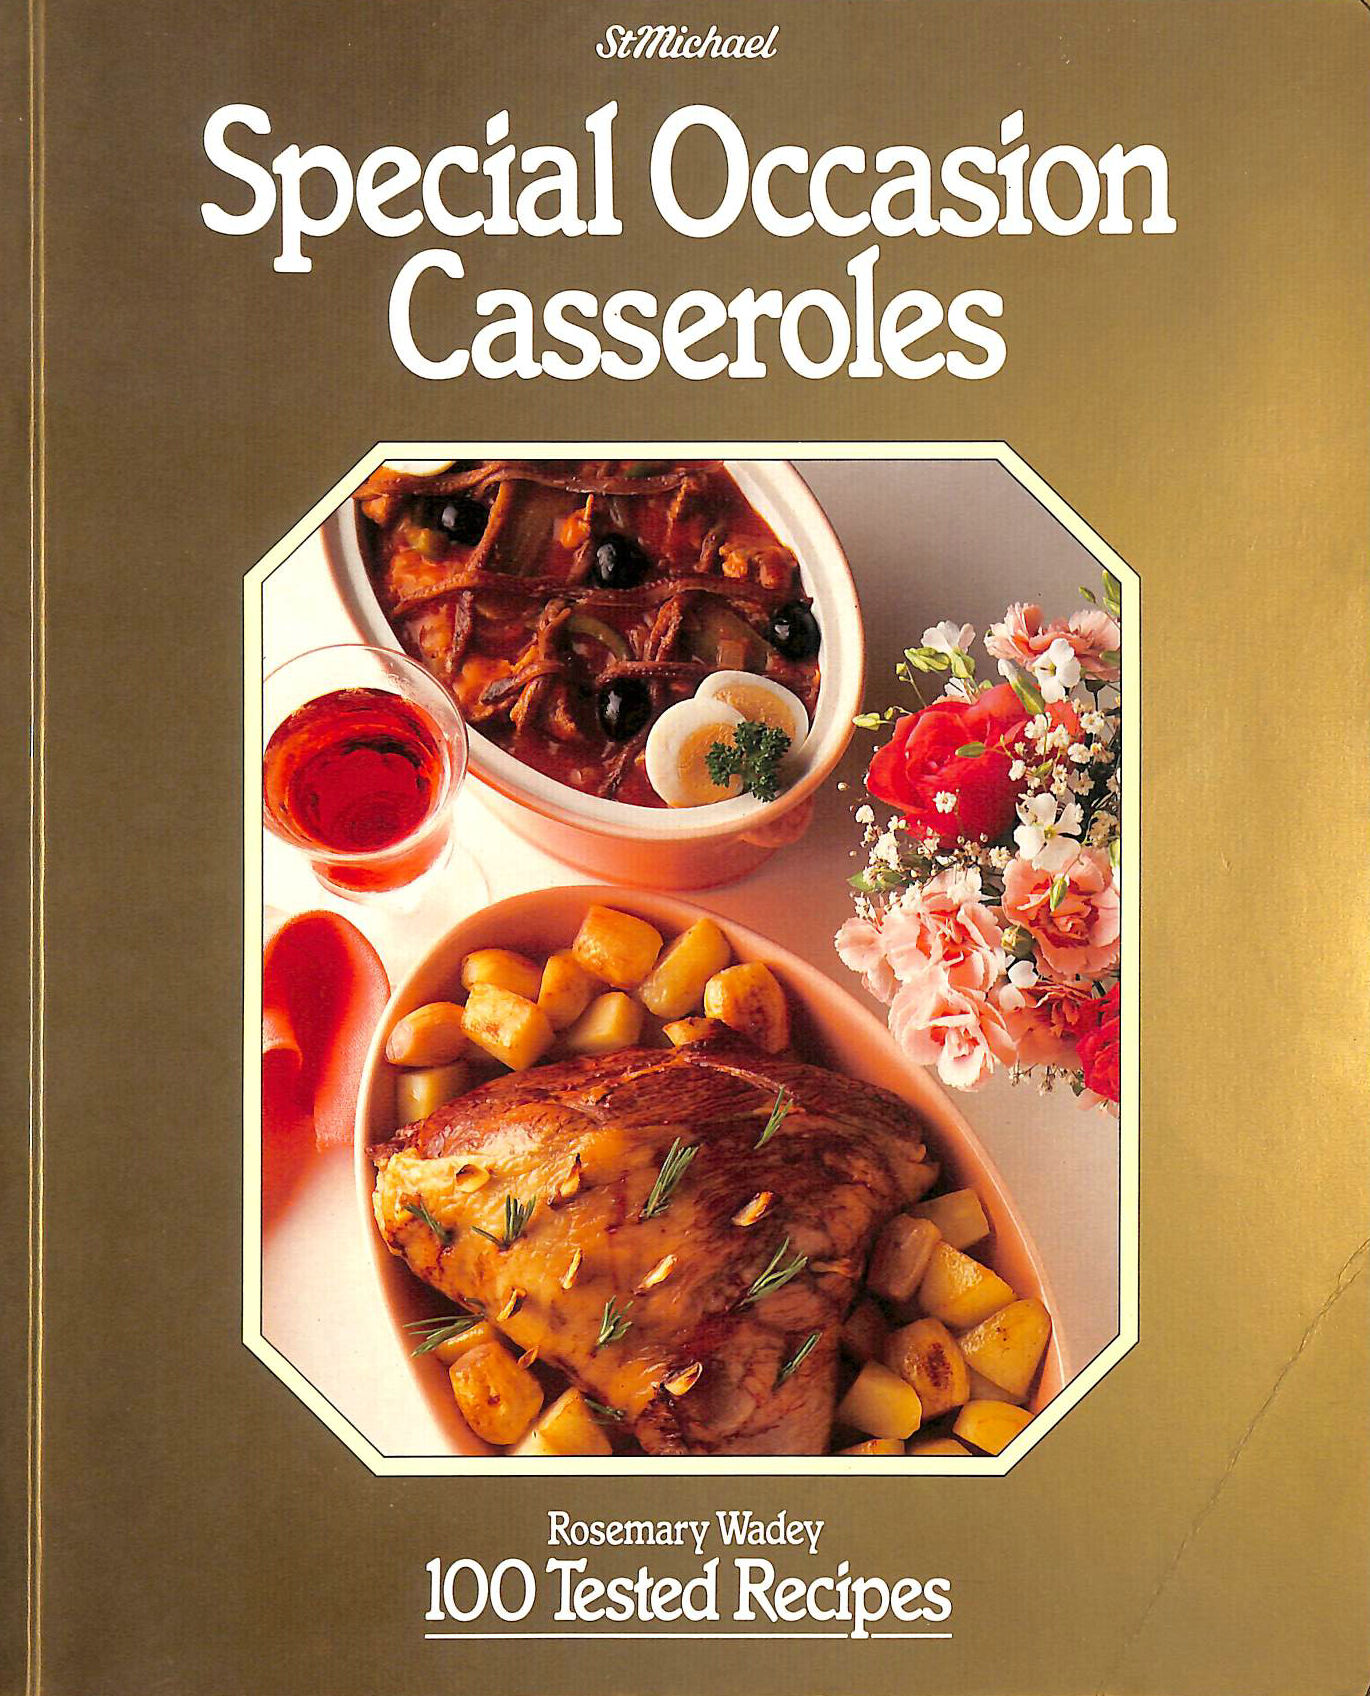 ROSEMARY WADEY - Special Occasion Casseroles